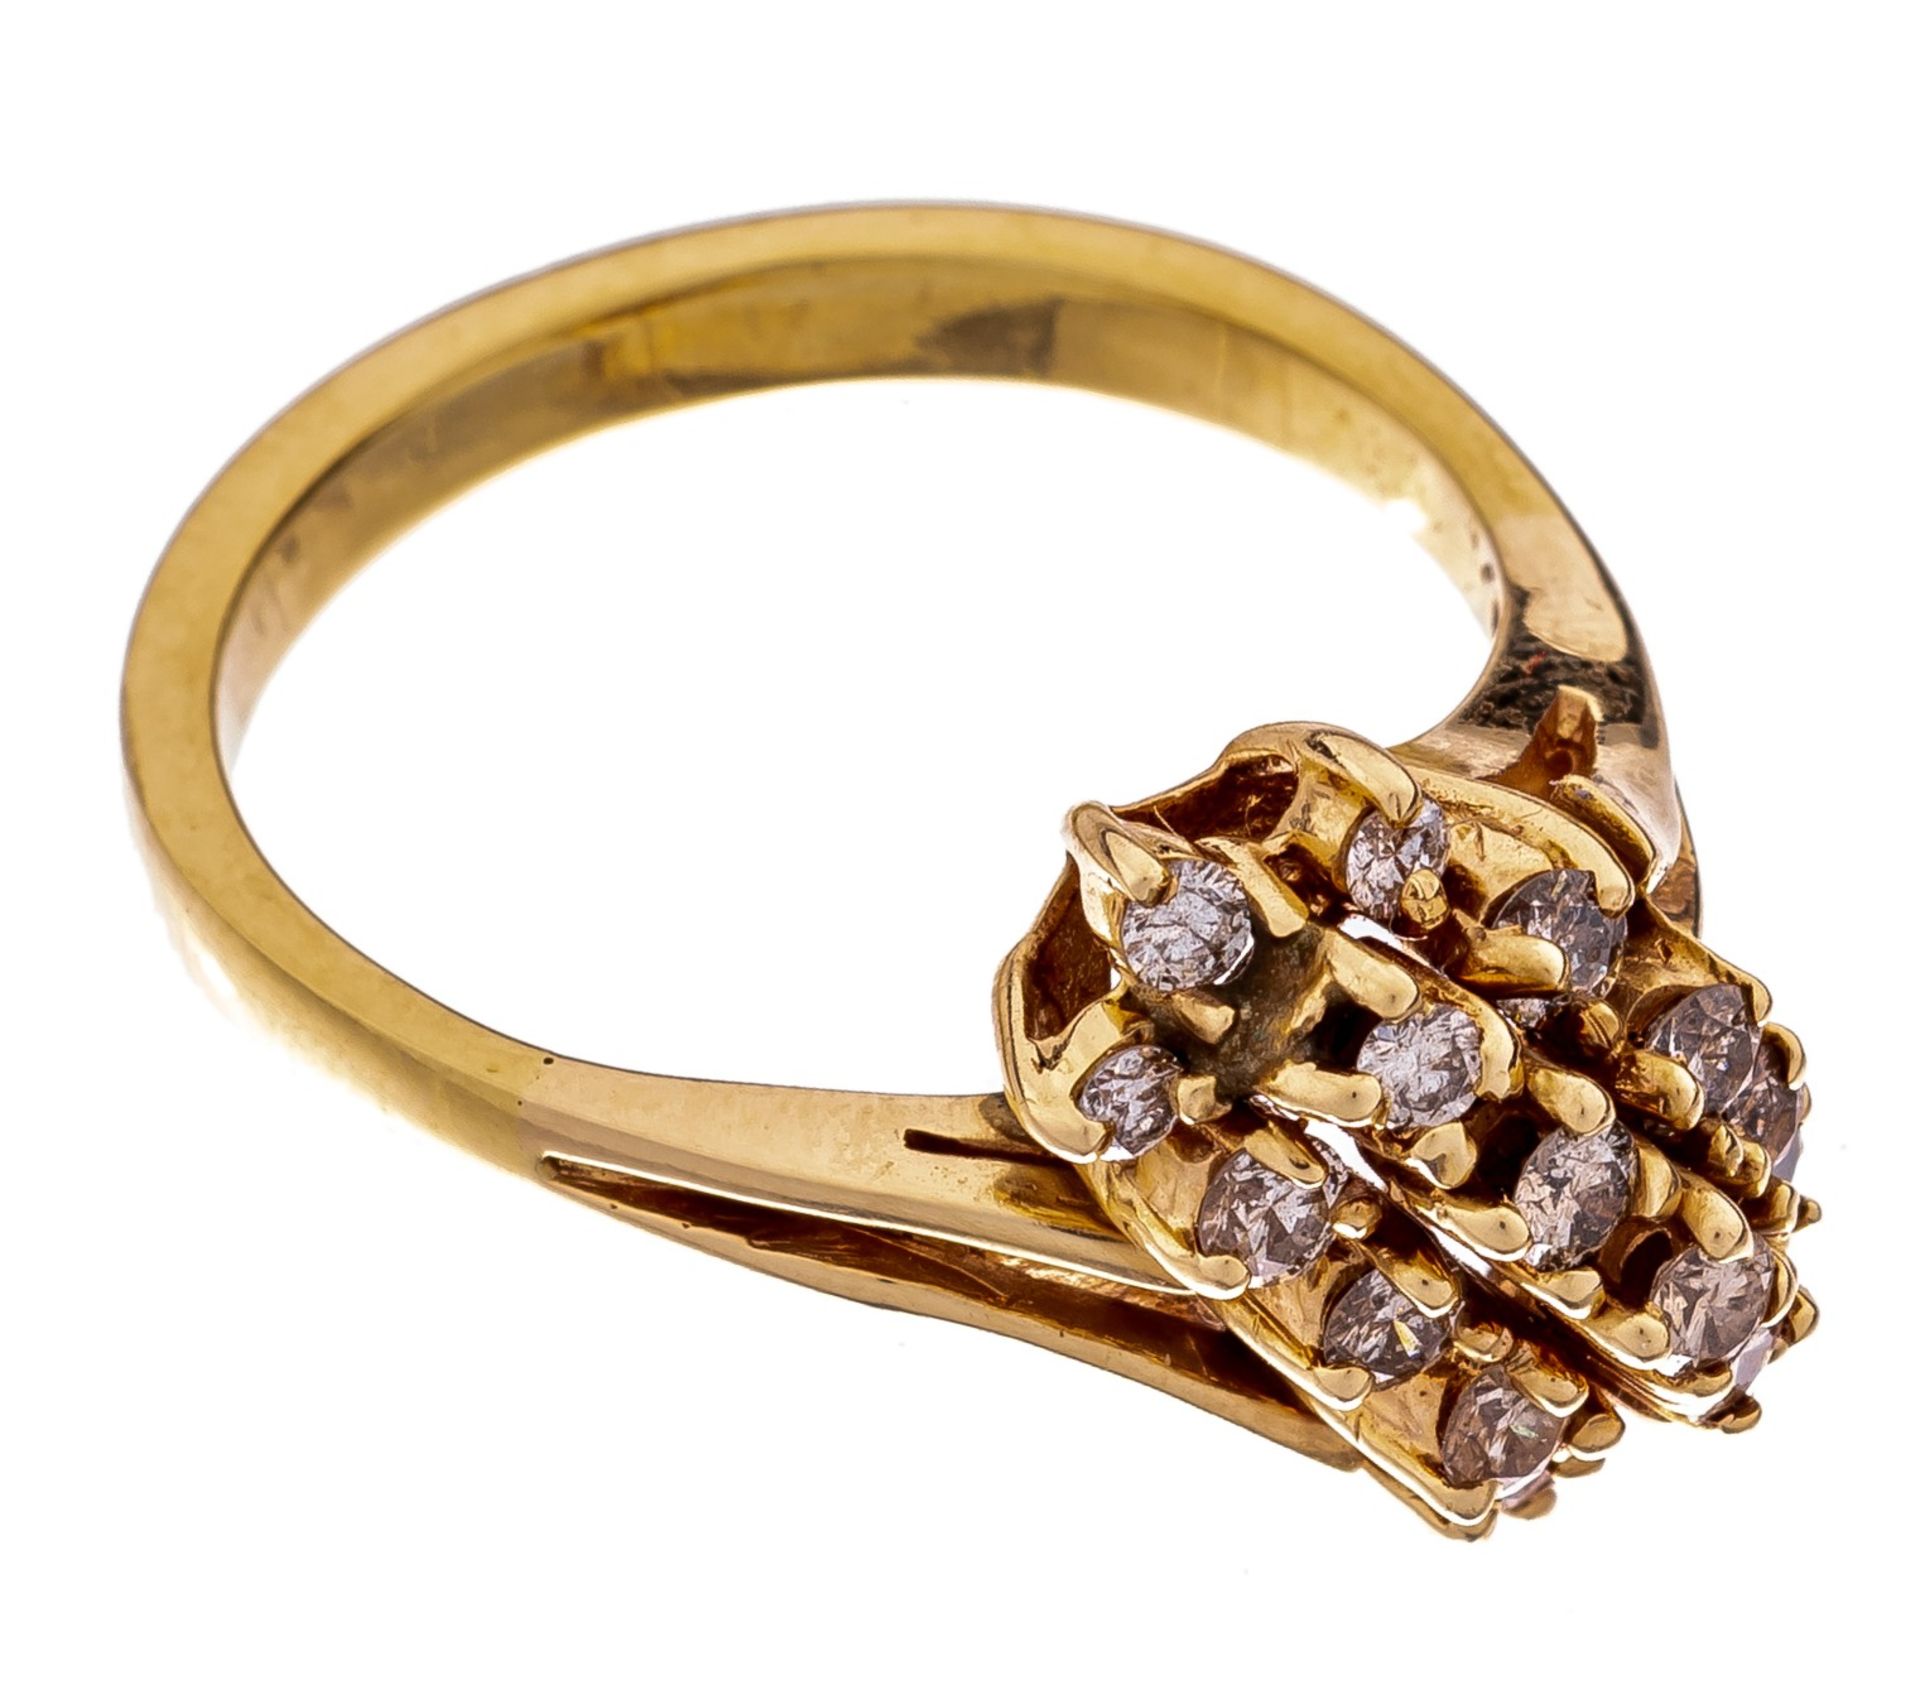 A ring in 18ct yellow gold, set with 19 brilliant cut diamonds, 7,5 g (all-in) - Image 2 of 3